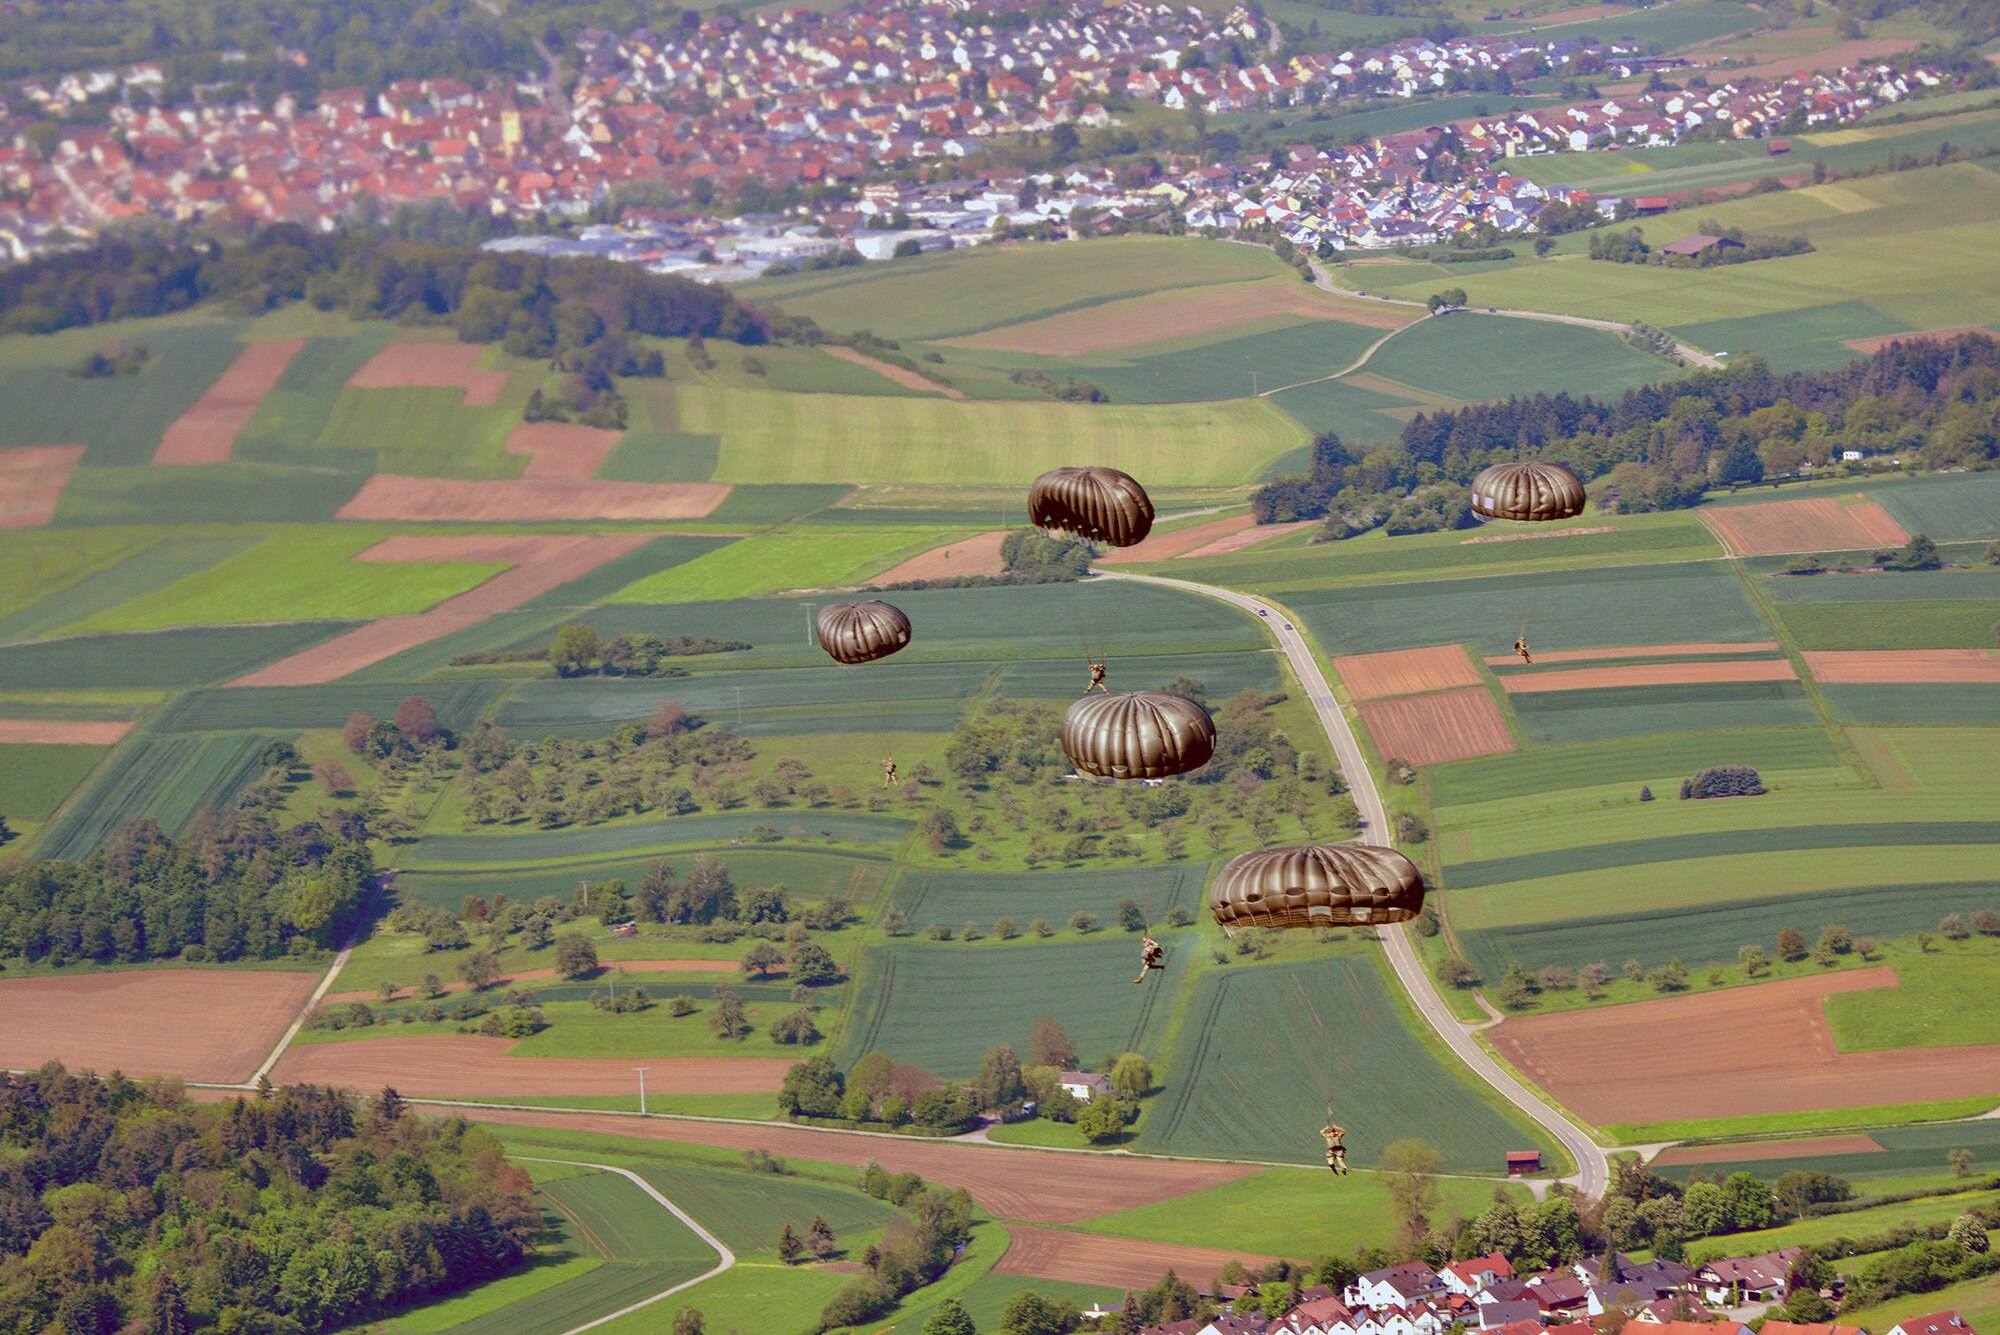 Paratroopers from U.S. Special Operations Commands Africa and Europe perform an airborne operation out of a U.S. Air Force C-130, at Malmsheim Airfield, Germany, May 23, 2019.